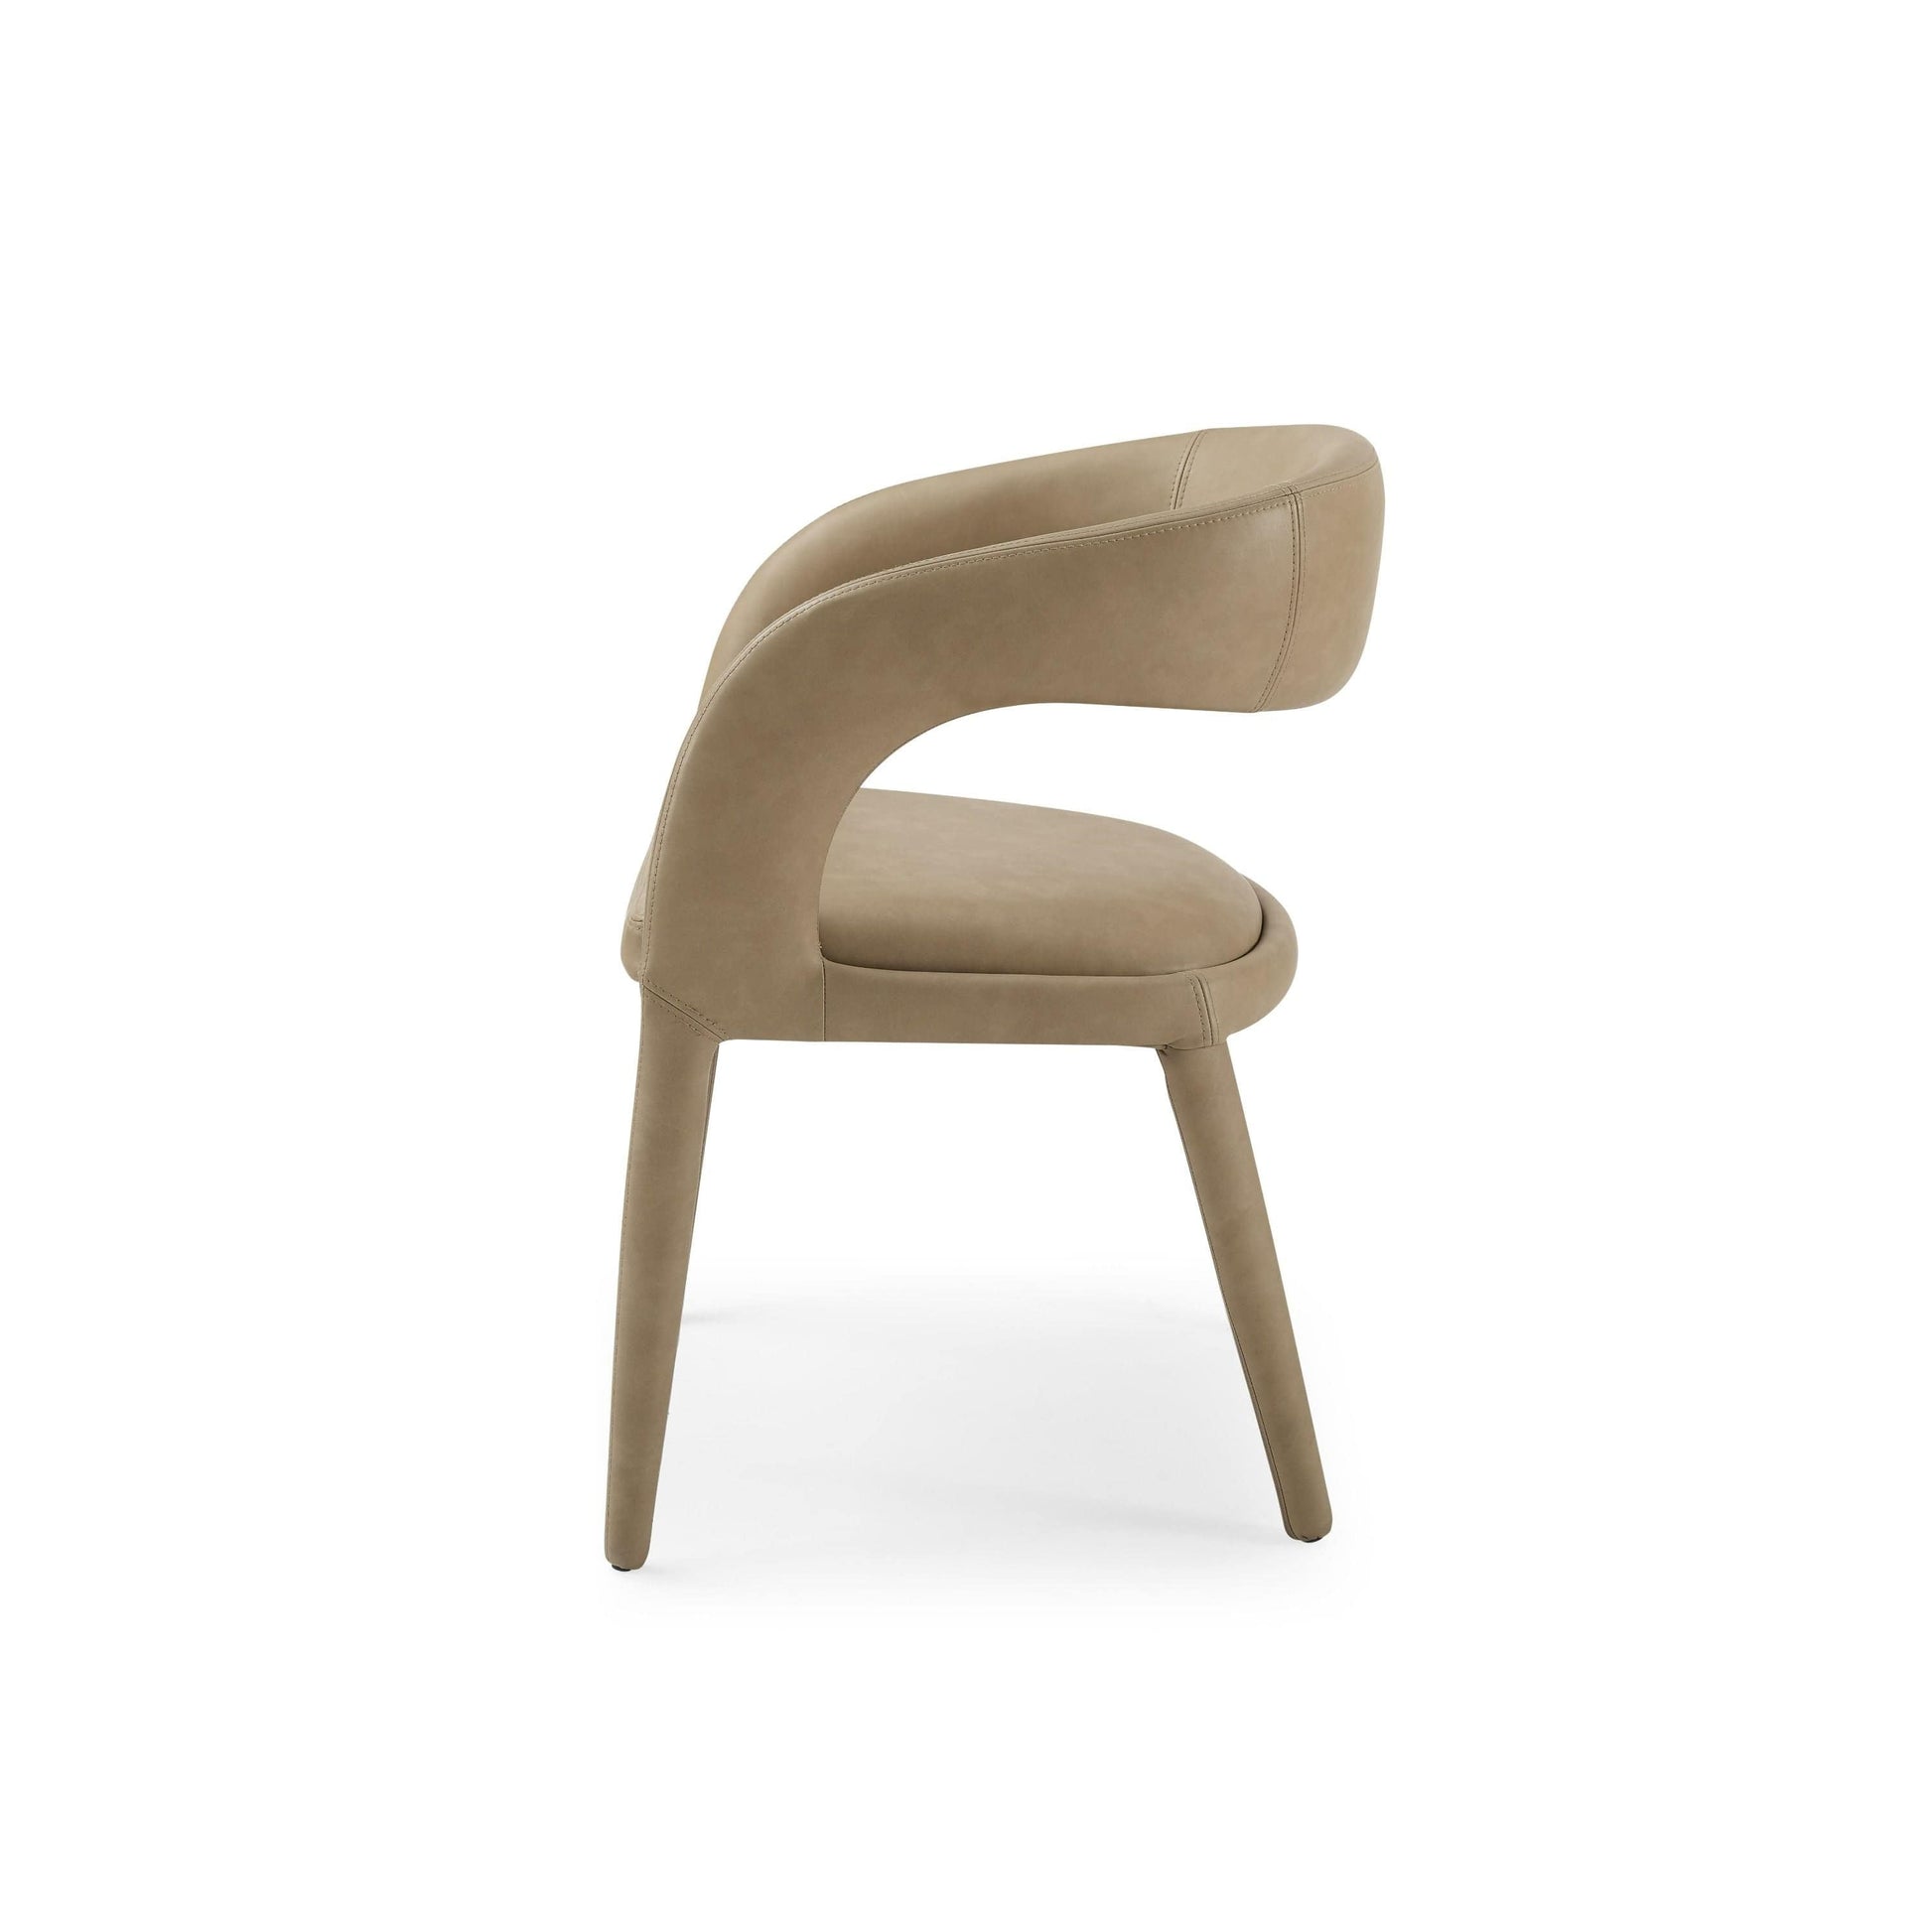 VIG Furniture Dining Chairs Modrest Mundra - Modern Tan Leatherette Dining Chair